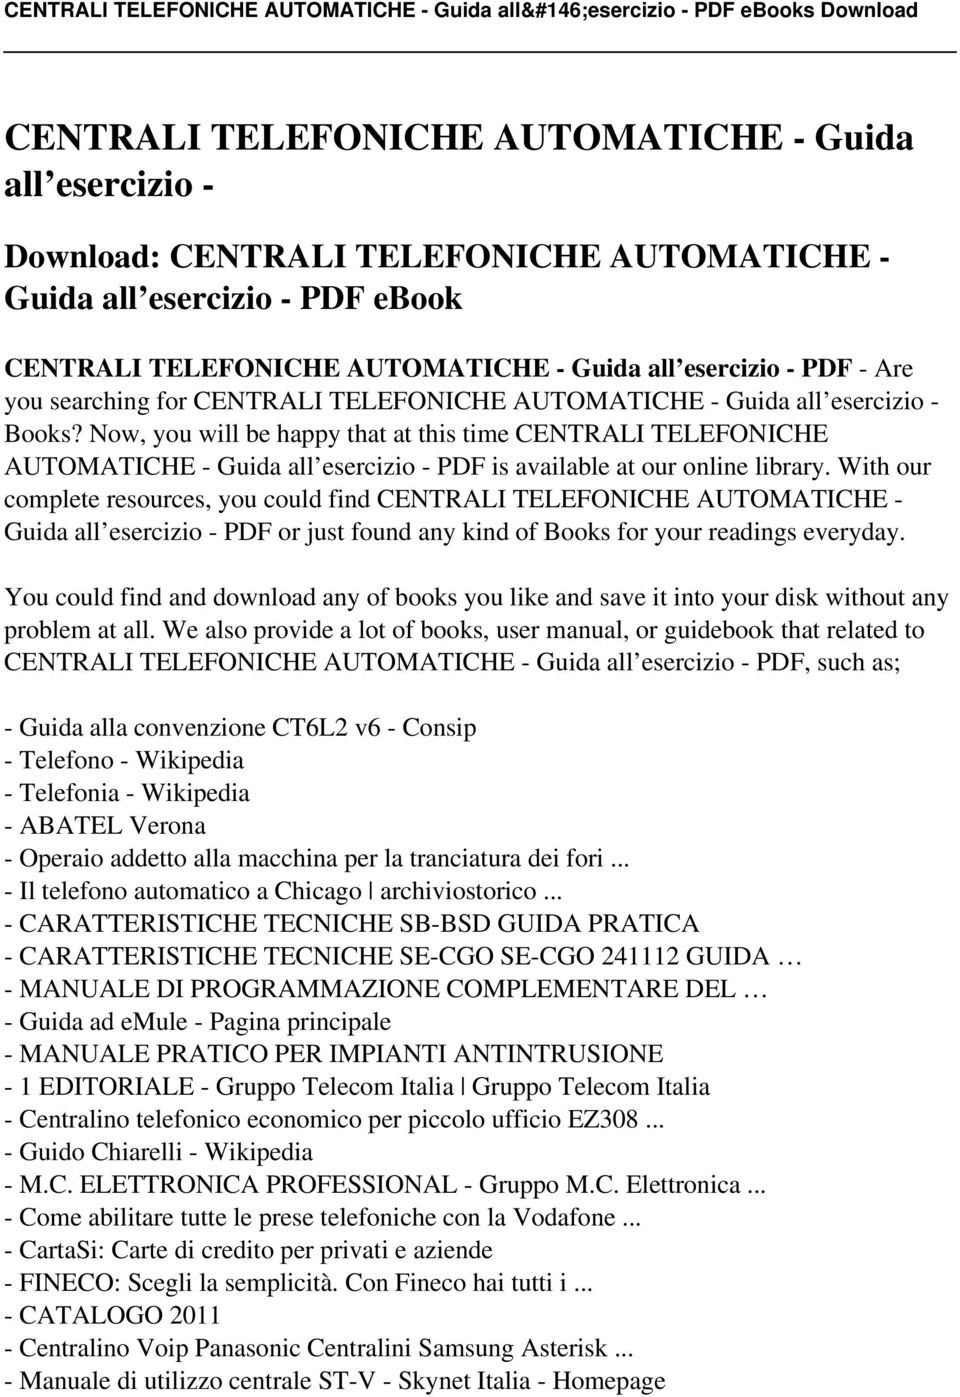 Now, you will be happy that at this time CENTRALI TELEFONICHE AUTOMATICHE - Guida all esercizio - PDF is available at our online library.